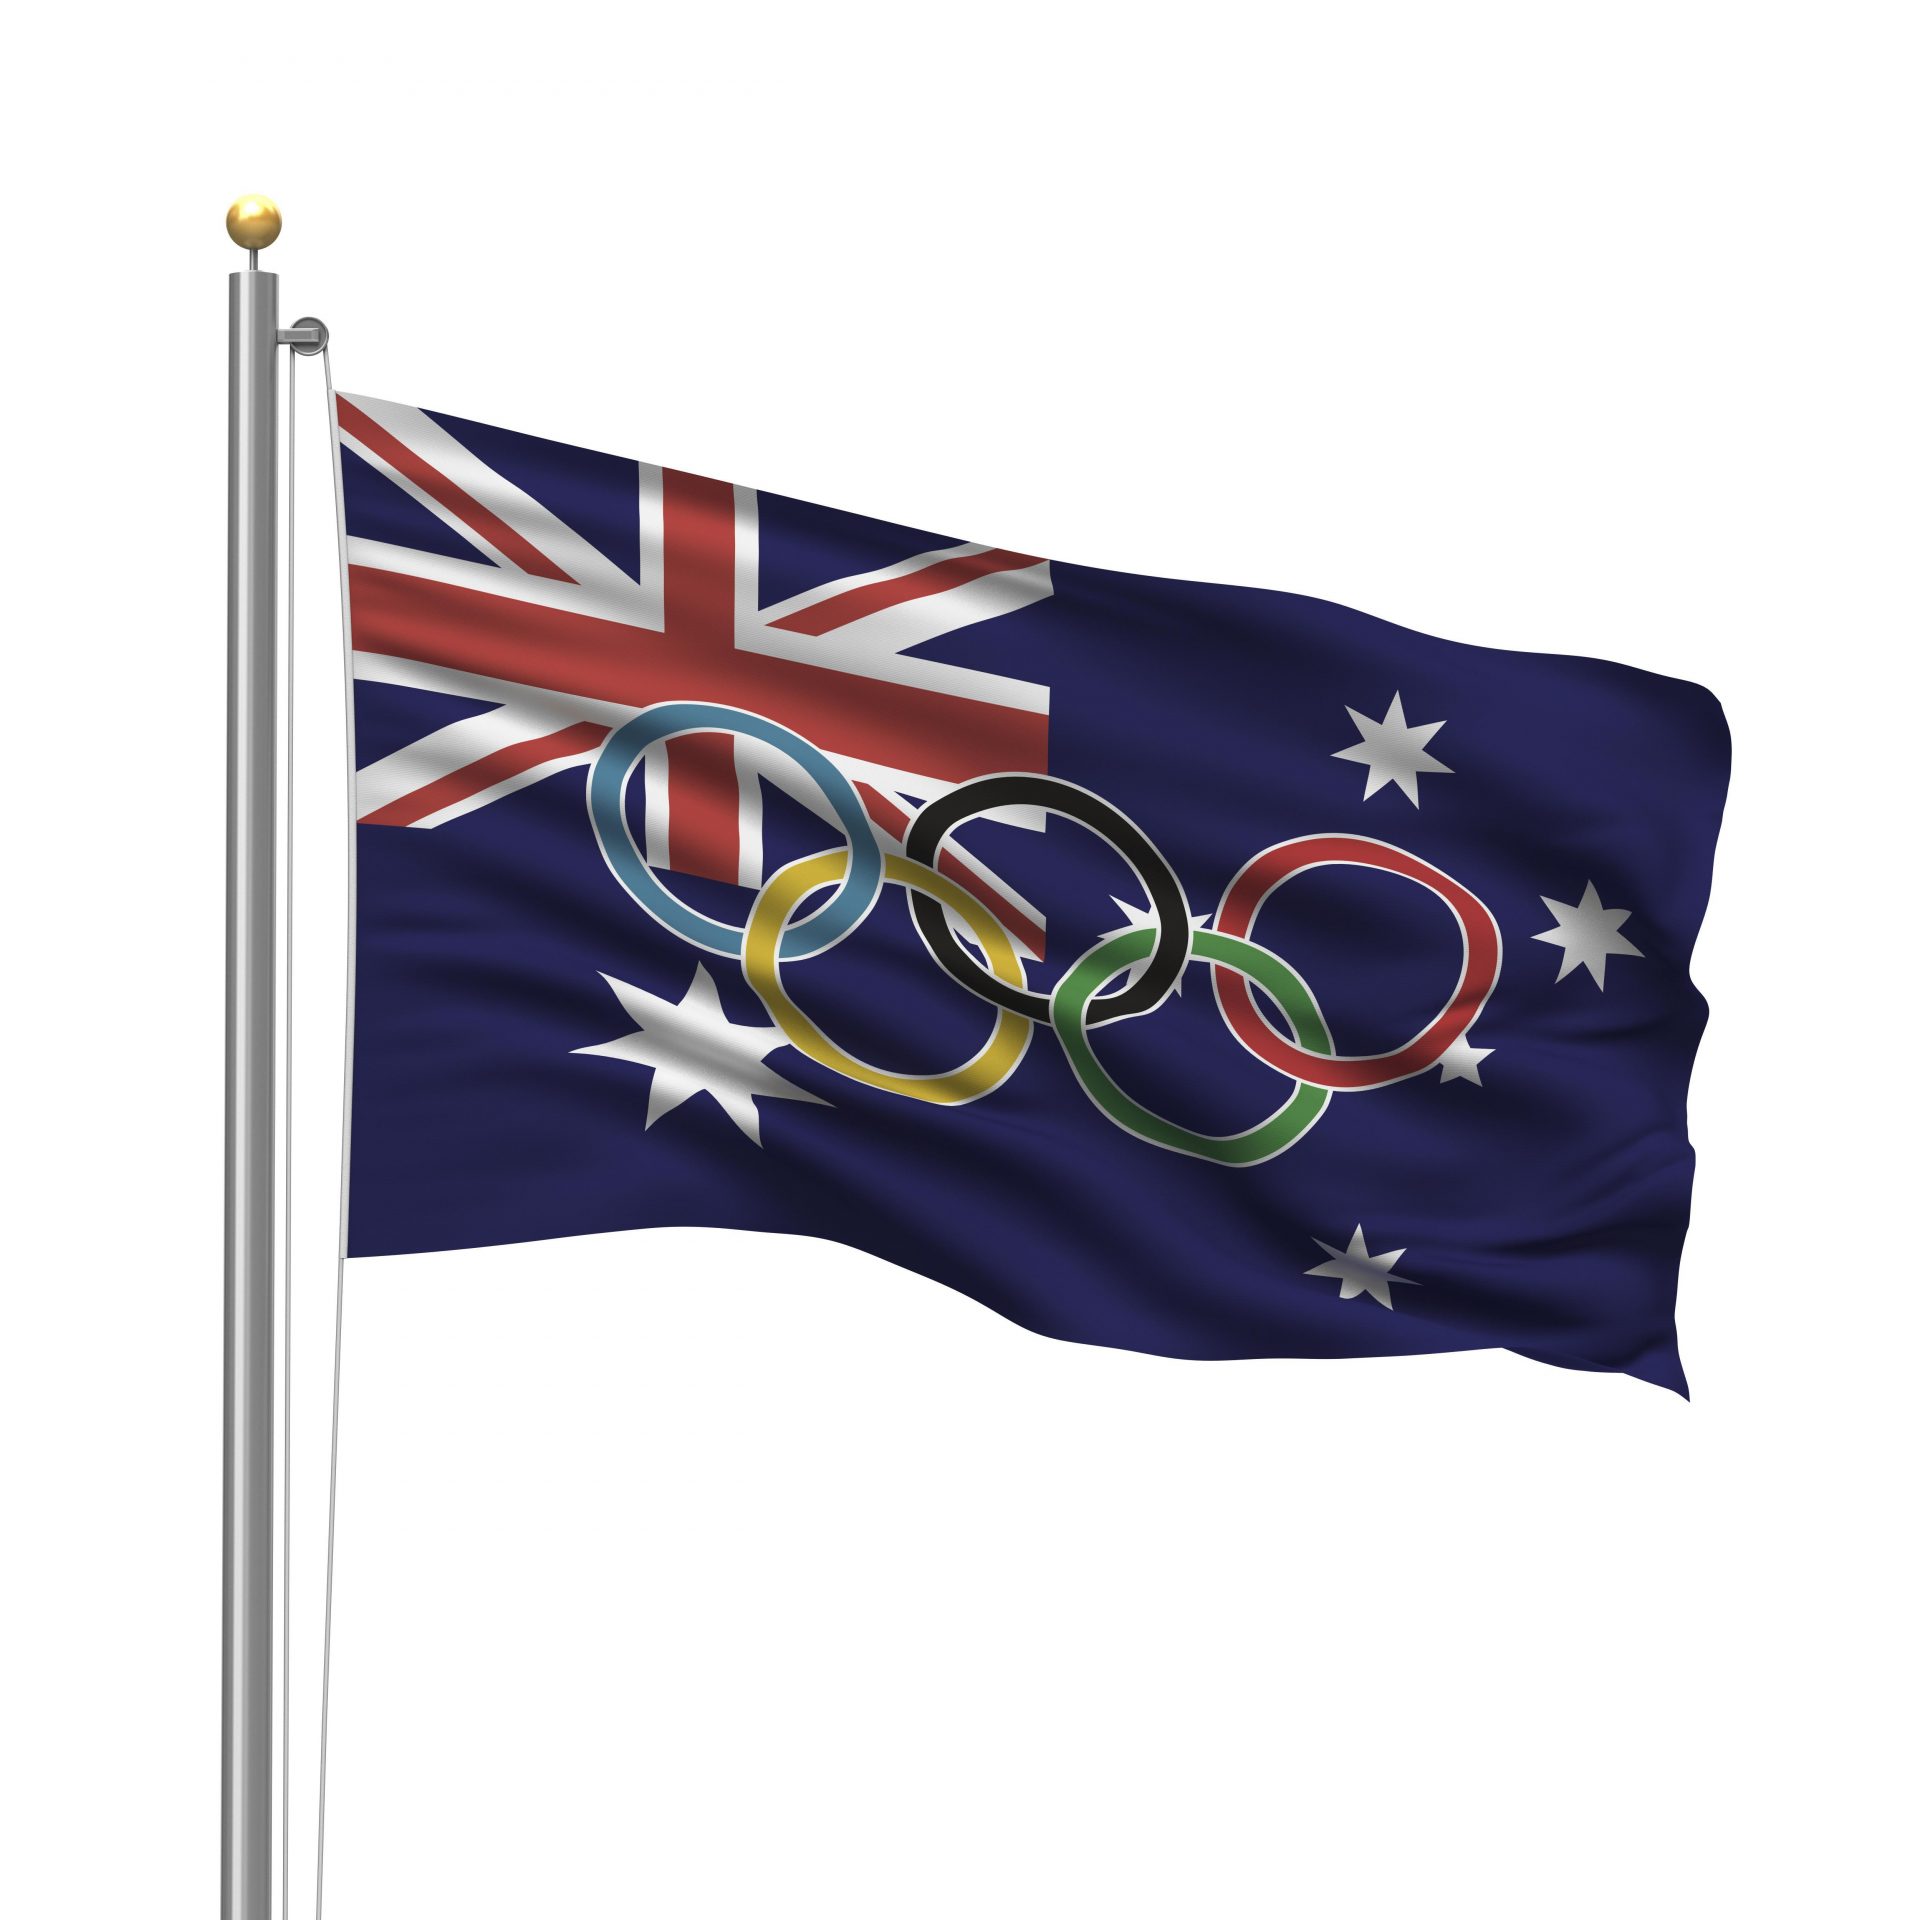 Flag of Australia with Olympic rings